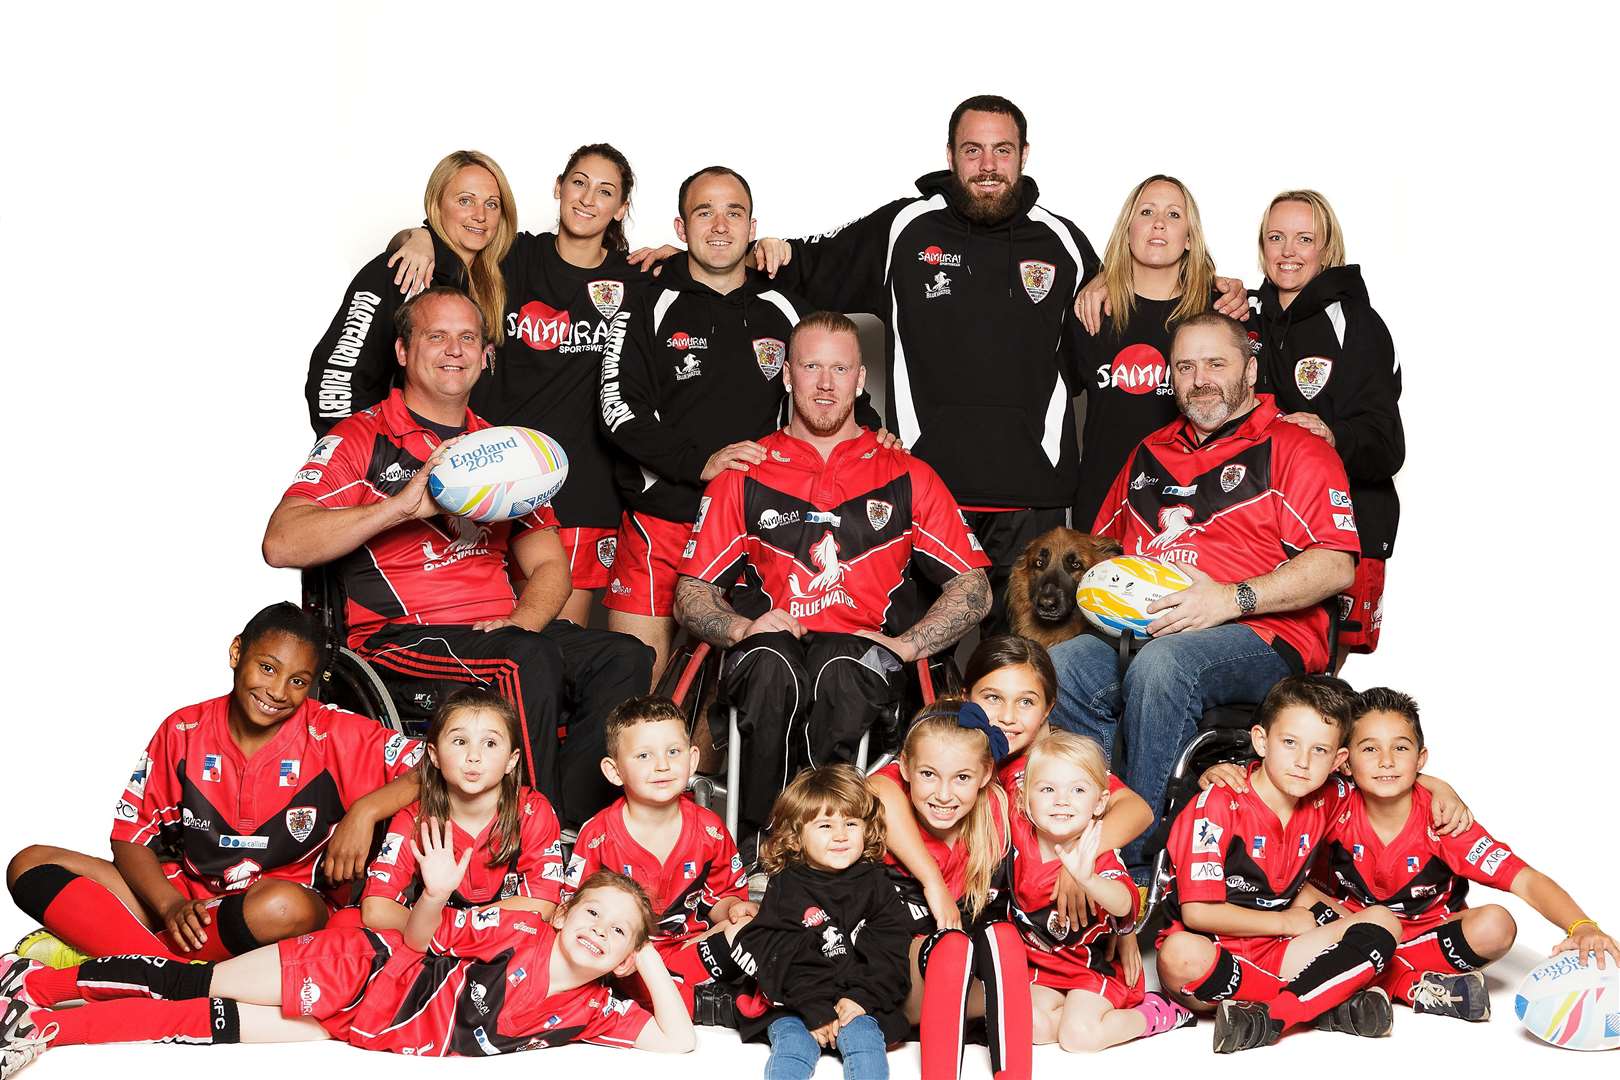 Bluewater has extended its sponsorship of Dartford Valley Rugby Club into 2017.